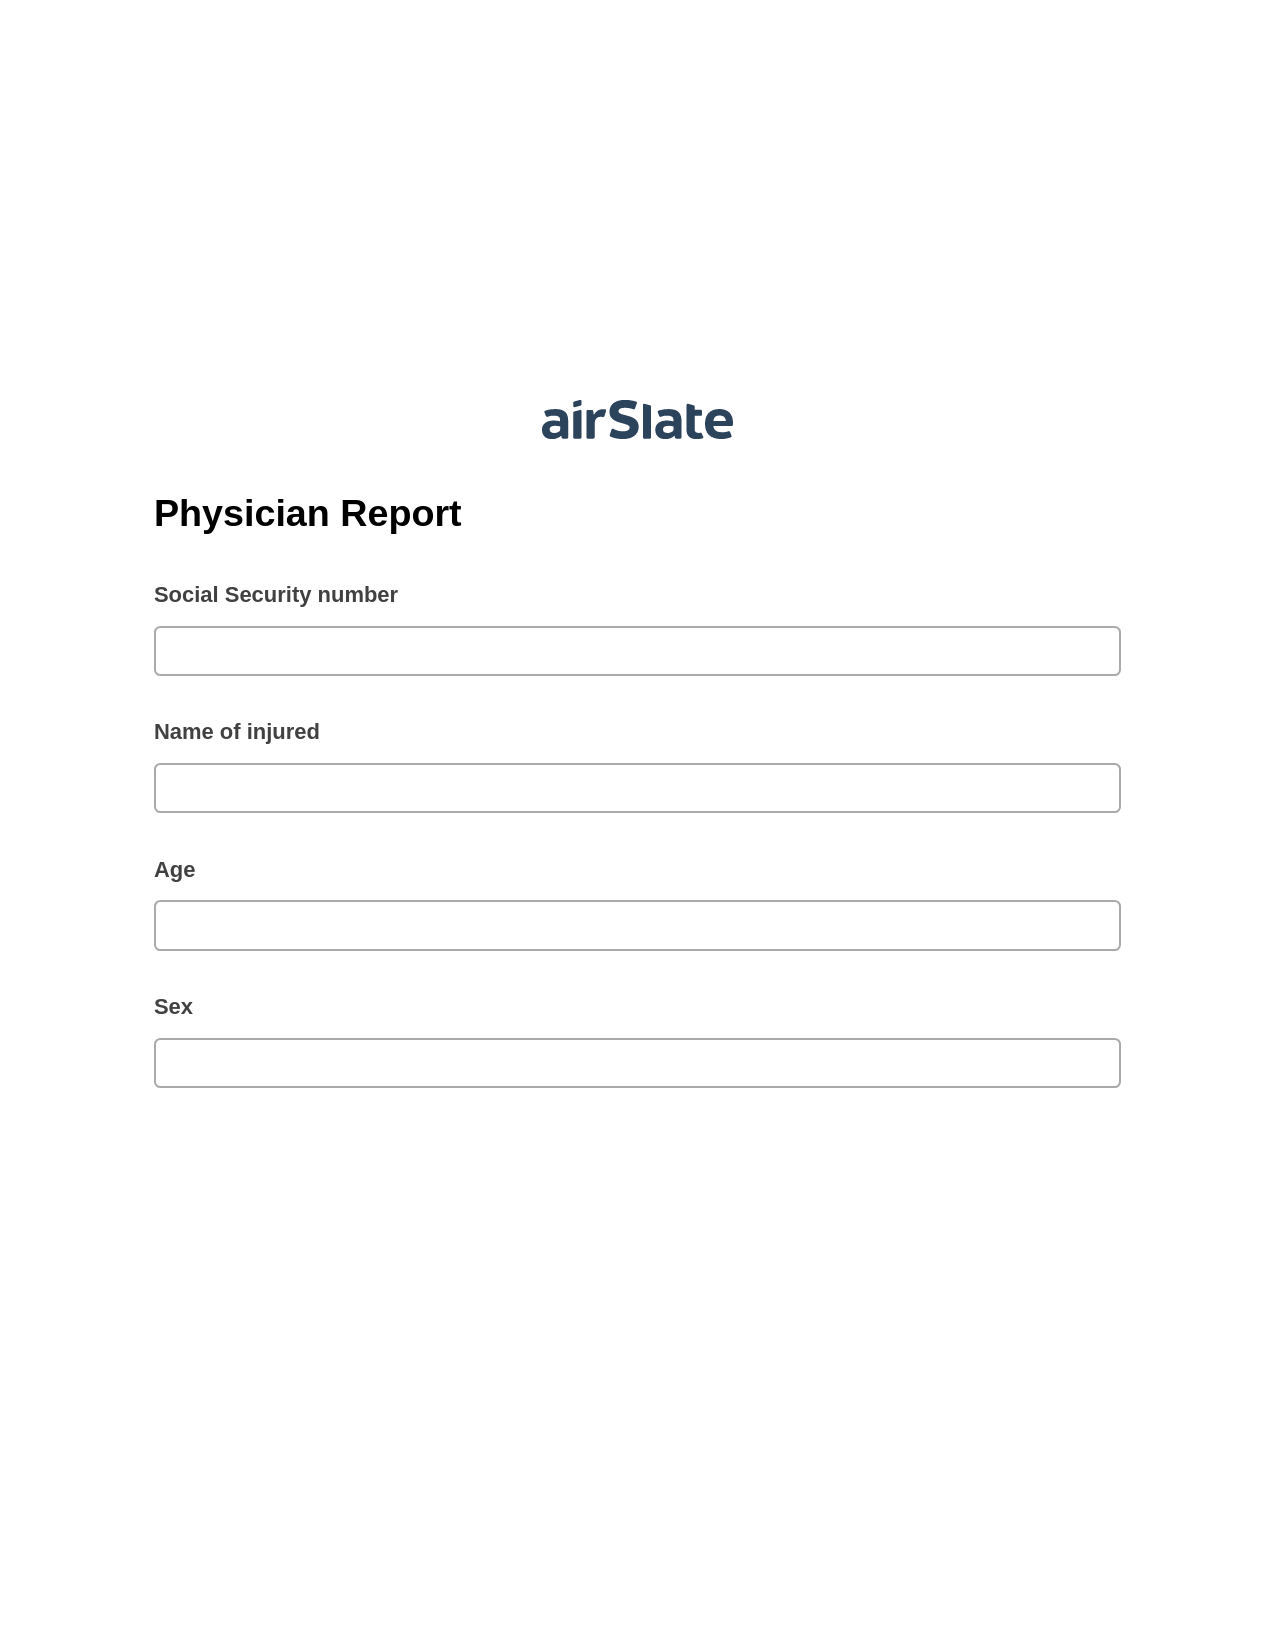 Physician Report Pre-fill from Litmos bot, Update NetSuite Record Bot, Archive to Google Drive Bot